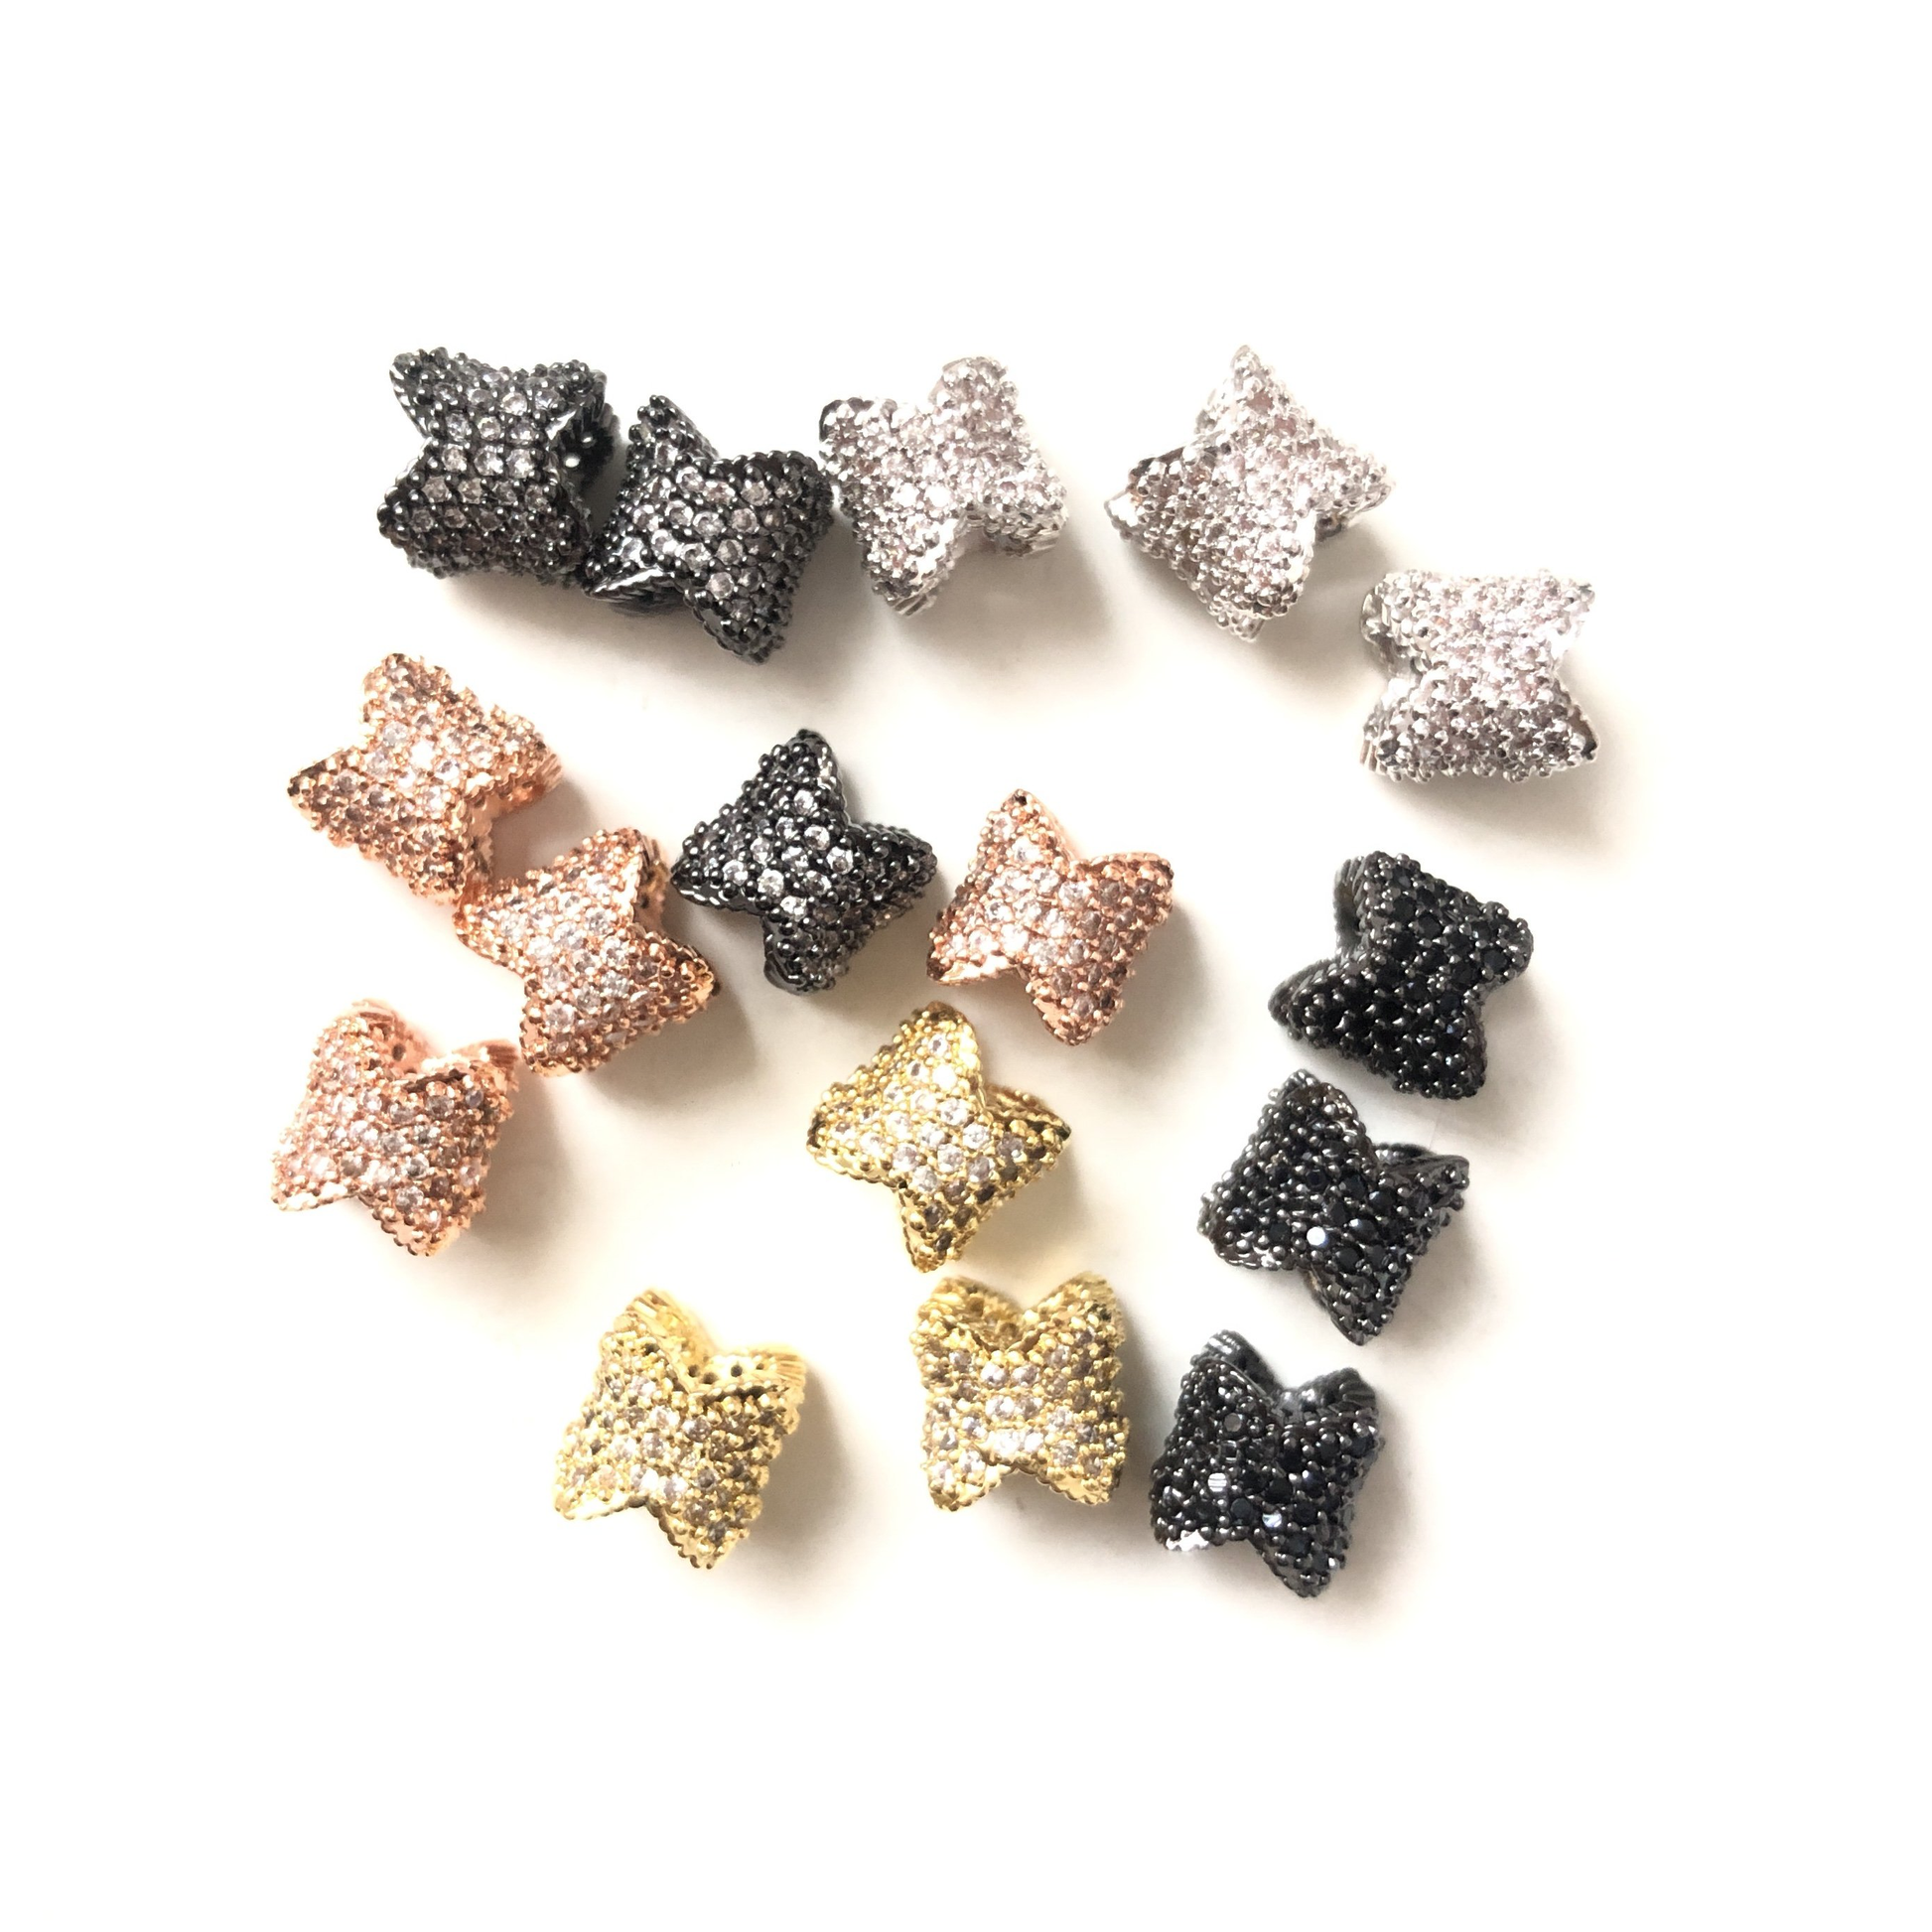 20pcs/lot 8*6.8mm CZ Paved Flower Tube Spacers Mix Color CZ Paved Spacers Tube Bar Centerpieces Charms Beads Beyond